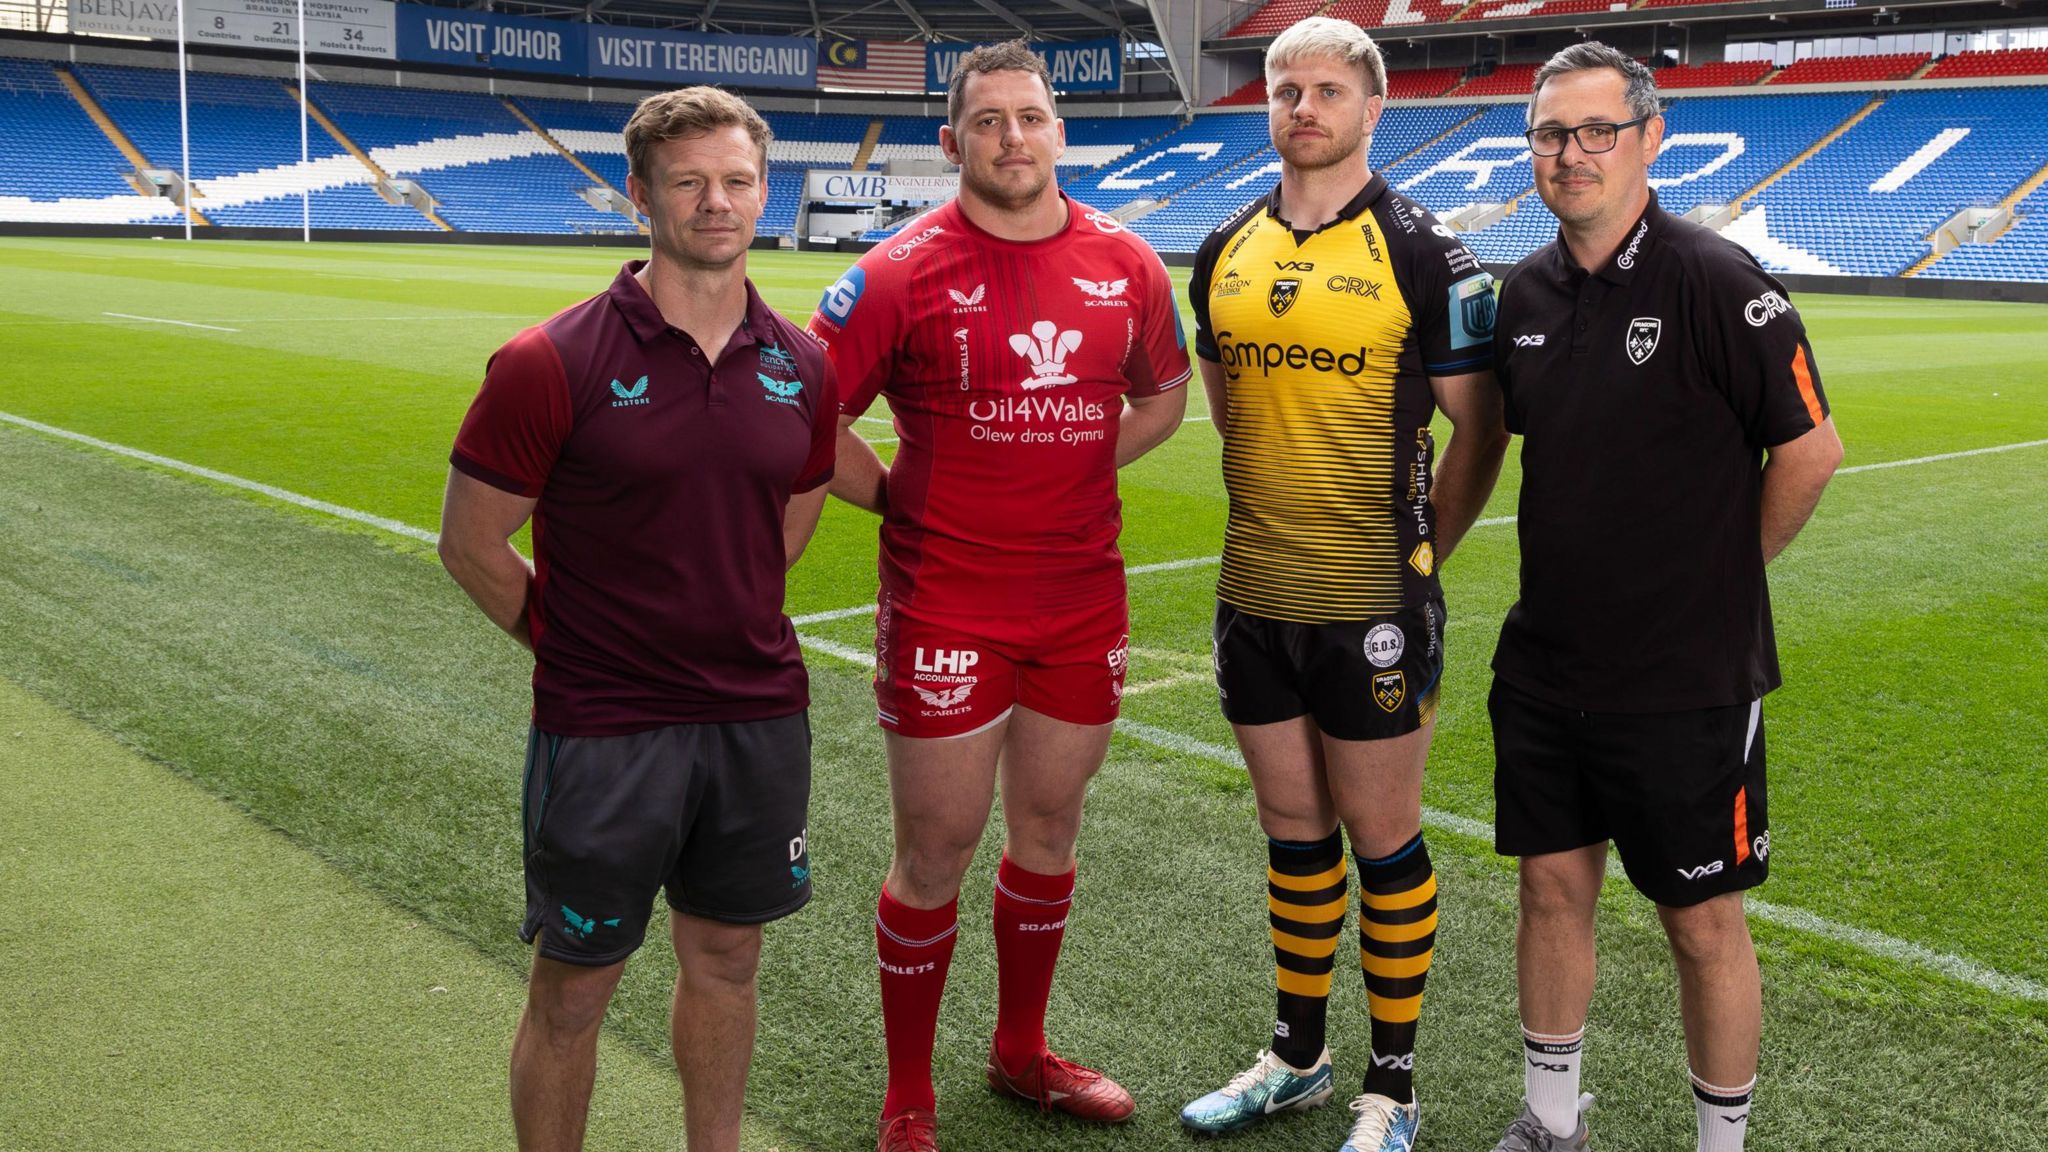 Scarlets and Dragons will open the programme at the Cardiff City Stadium